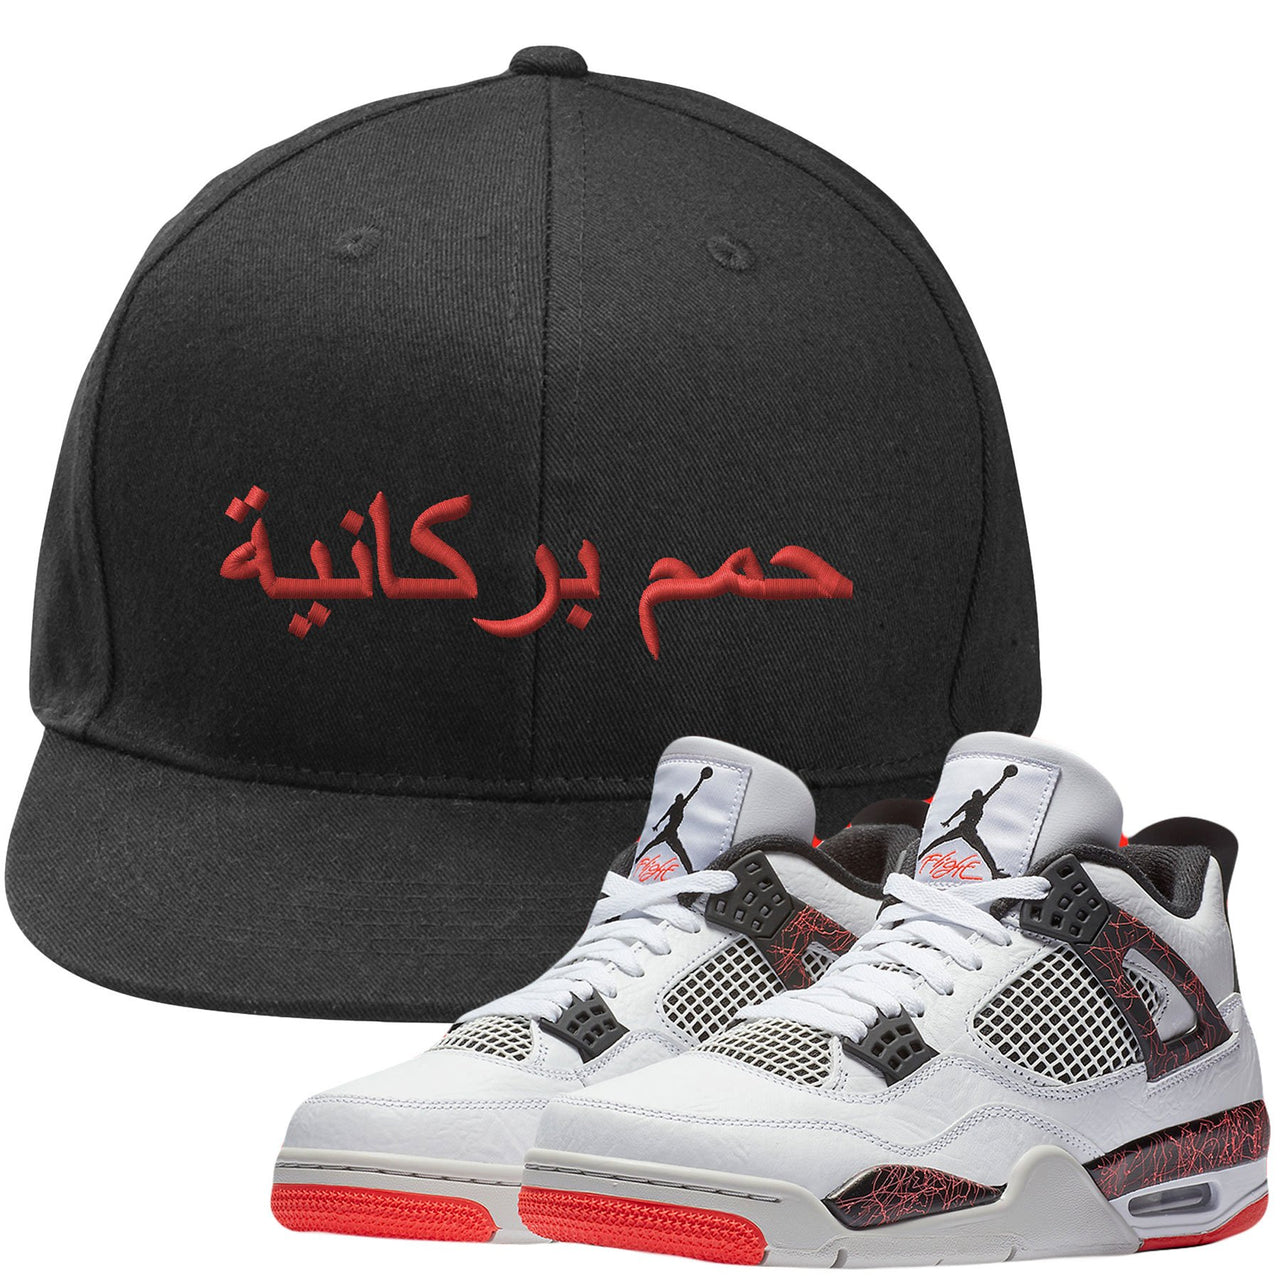 Match your pair of Jordan 4 Pale Citron "Hot Lava 4s" sneakers with this sneaker matching snapback hat